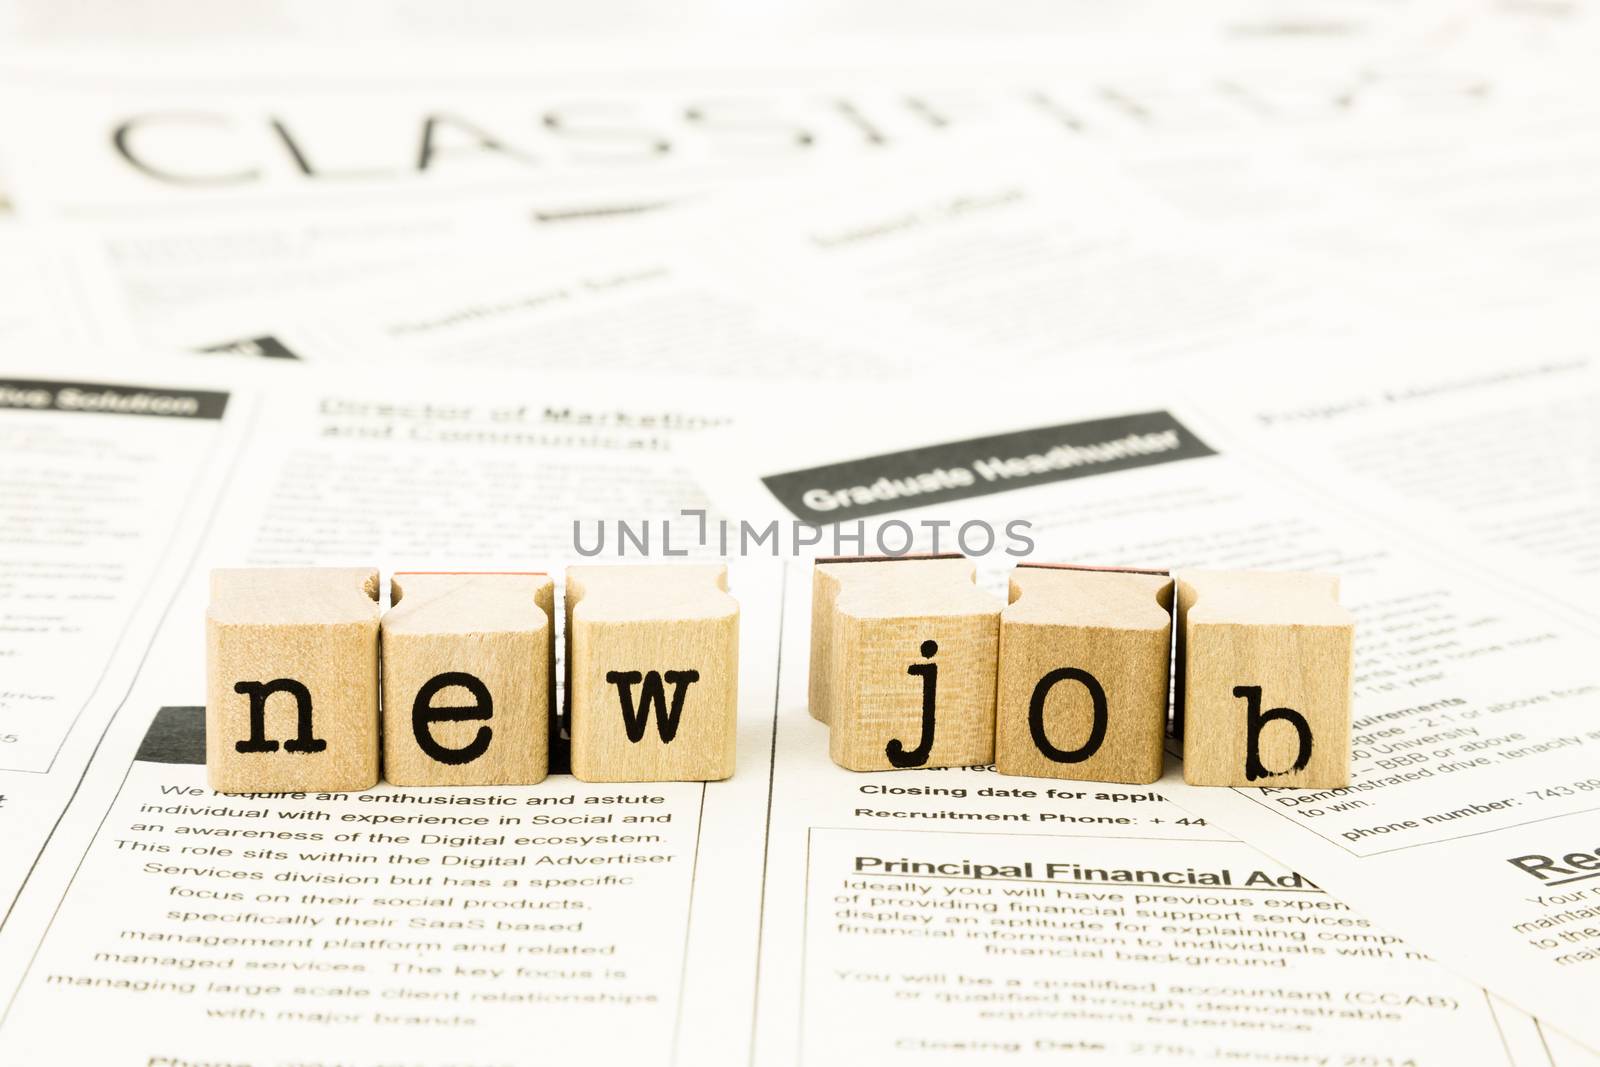 closeup new job wording on classifieds ads and newspaper, recruitment and employment concepts and ideas